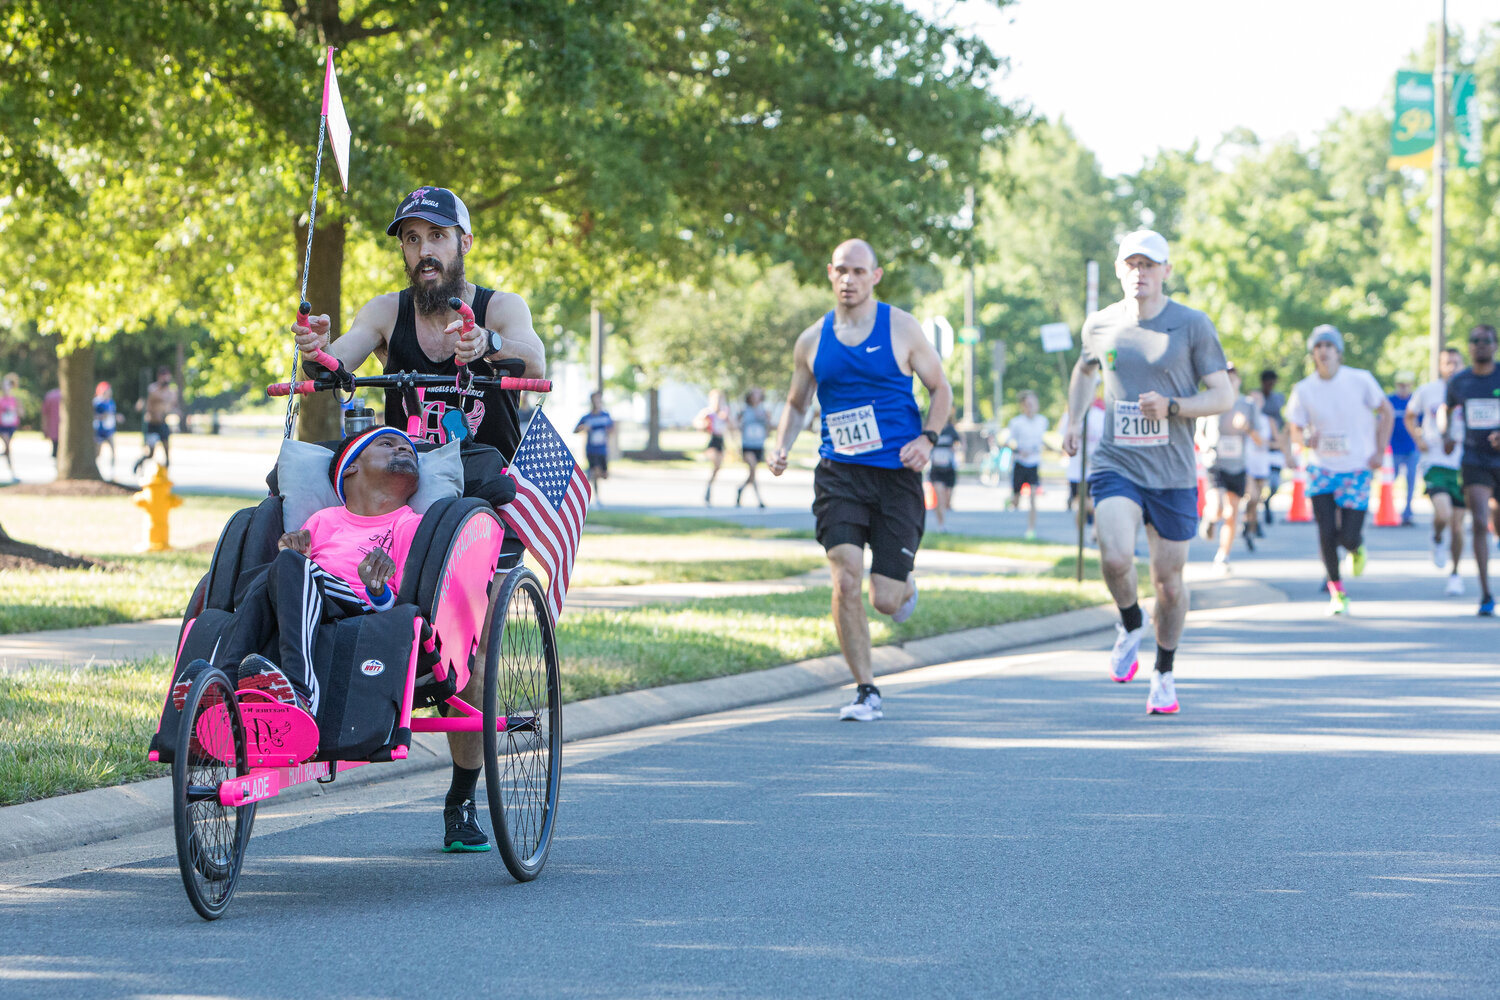 The runner helps a friend in a wheelchair participate in the race.